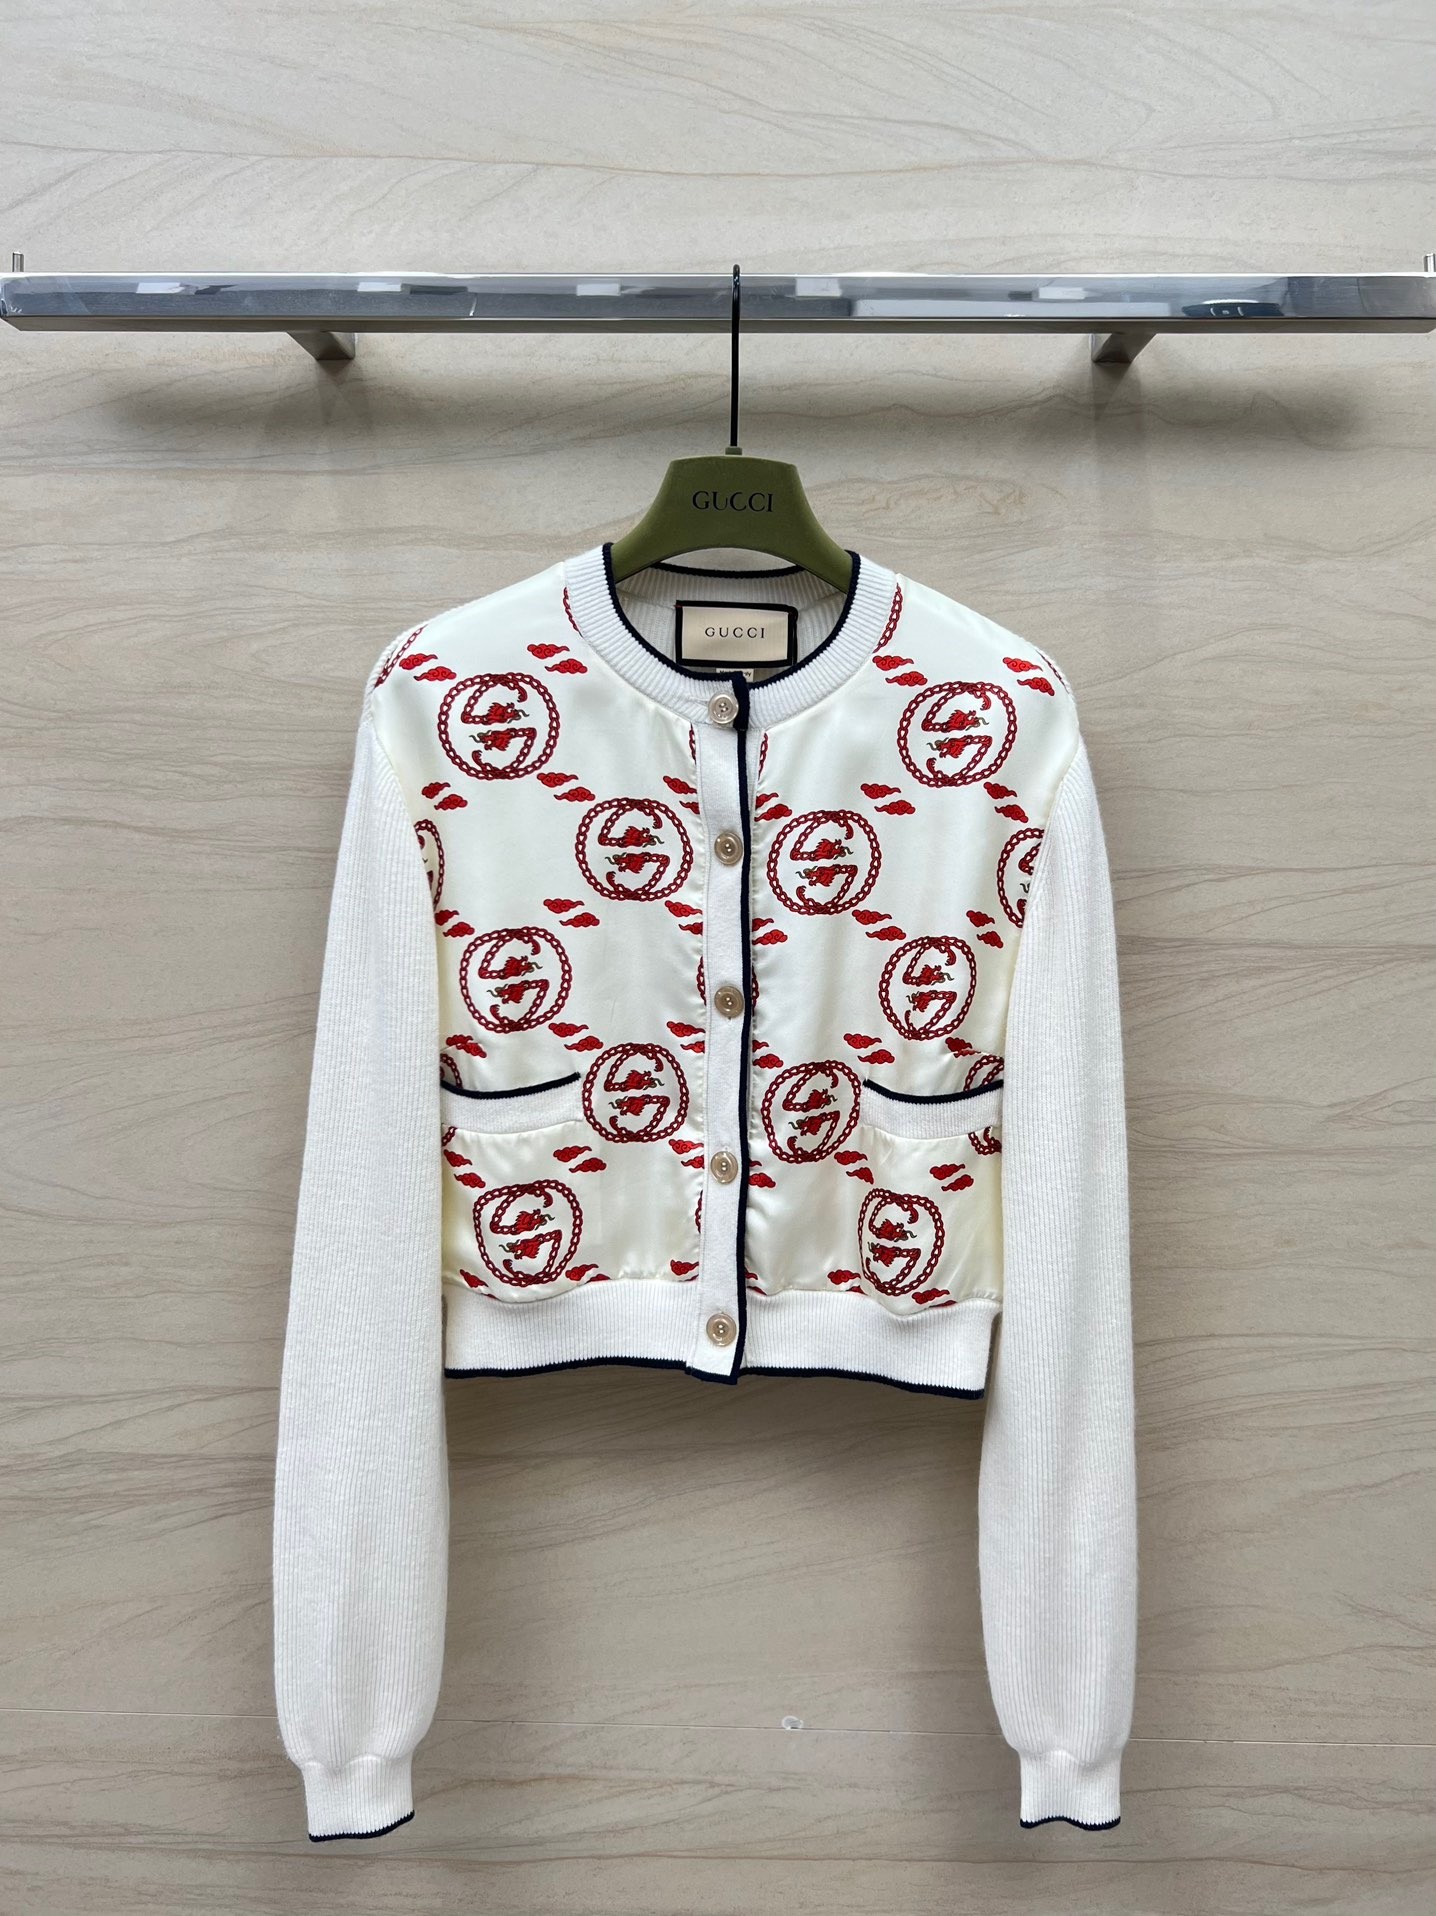 Gucci Clothing Cardigans Printing Knitting Silk Spring Collection